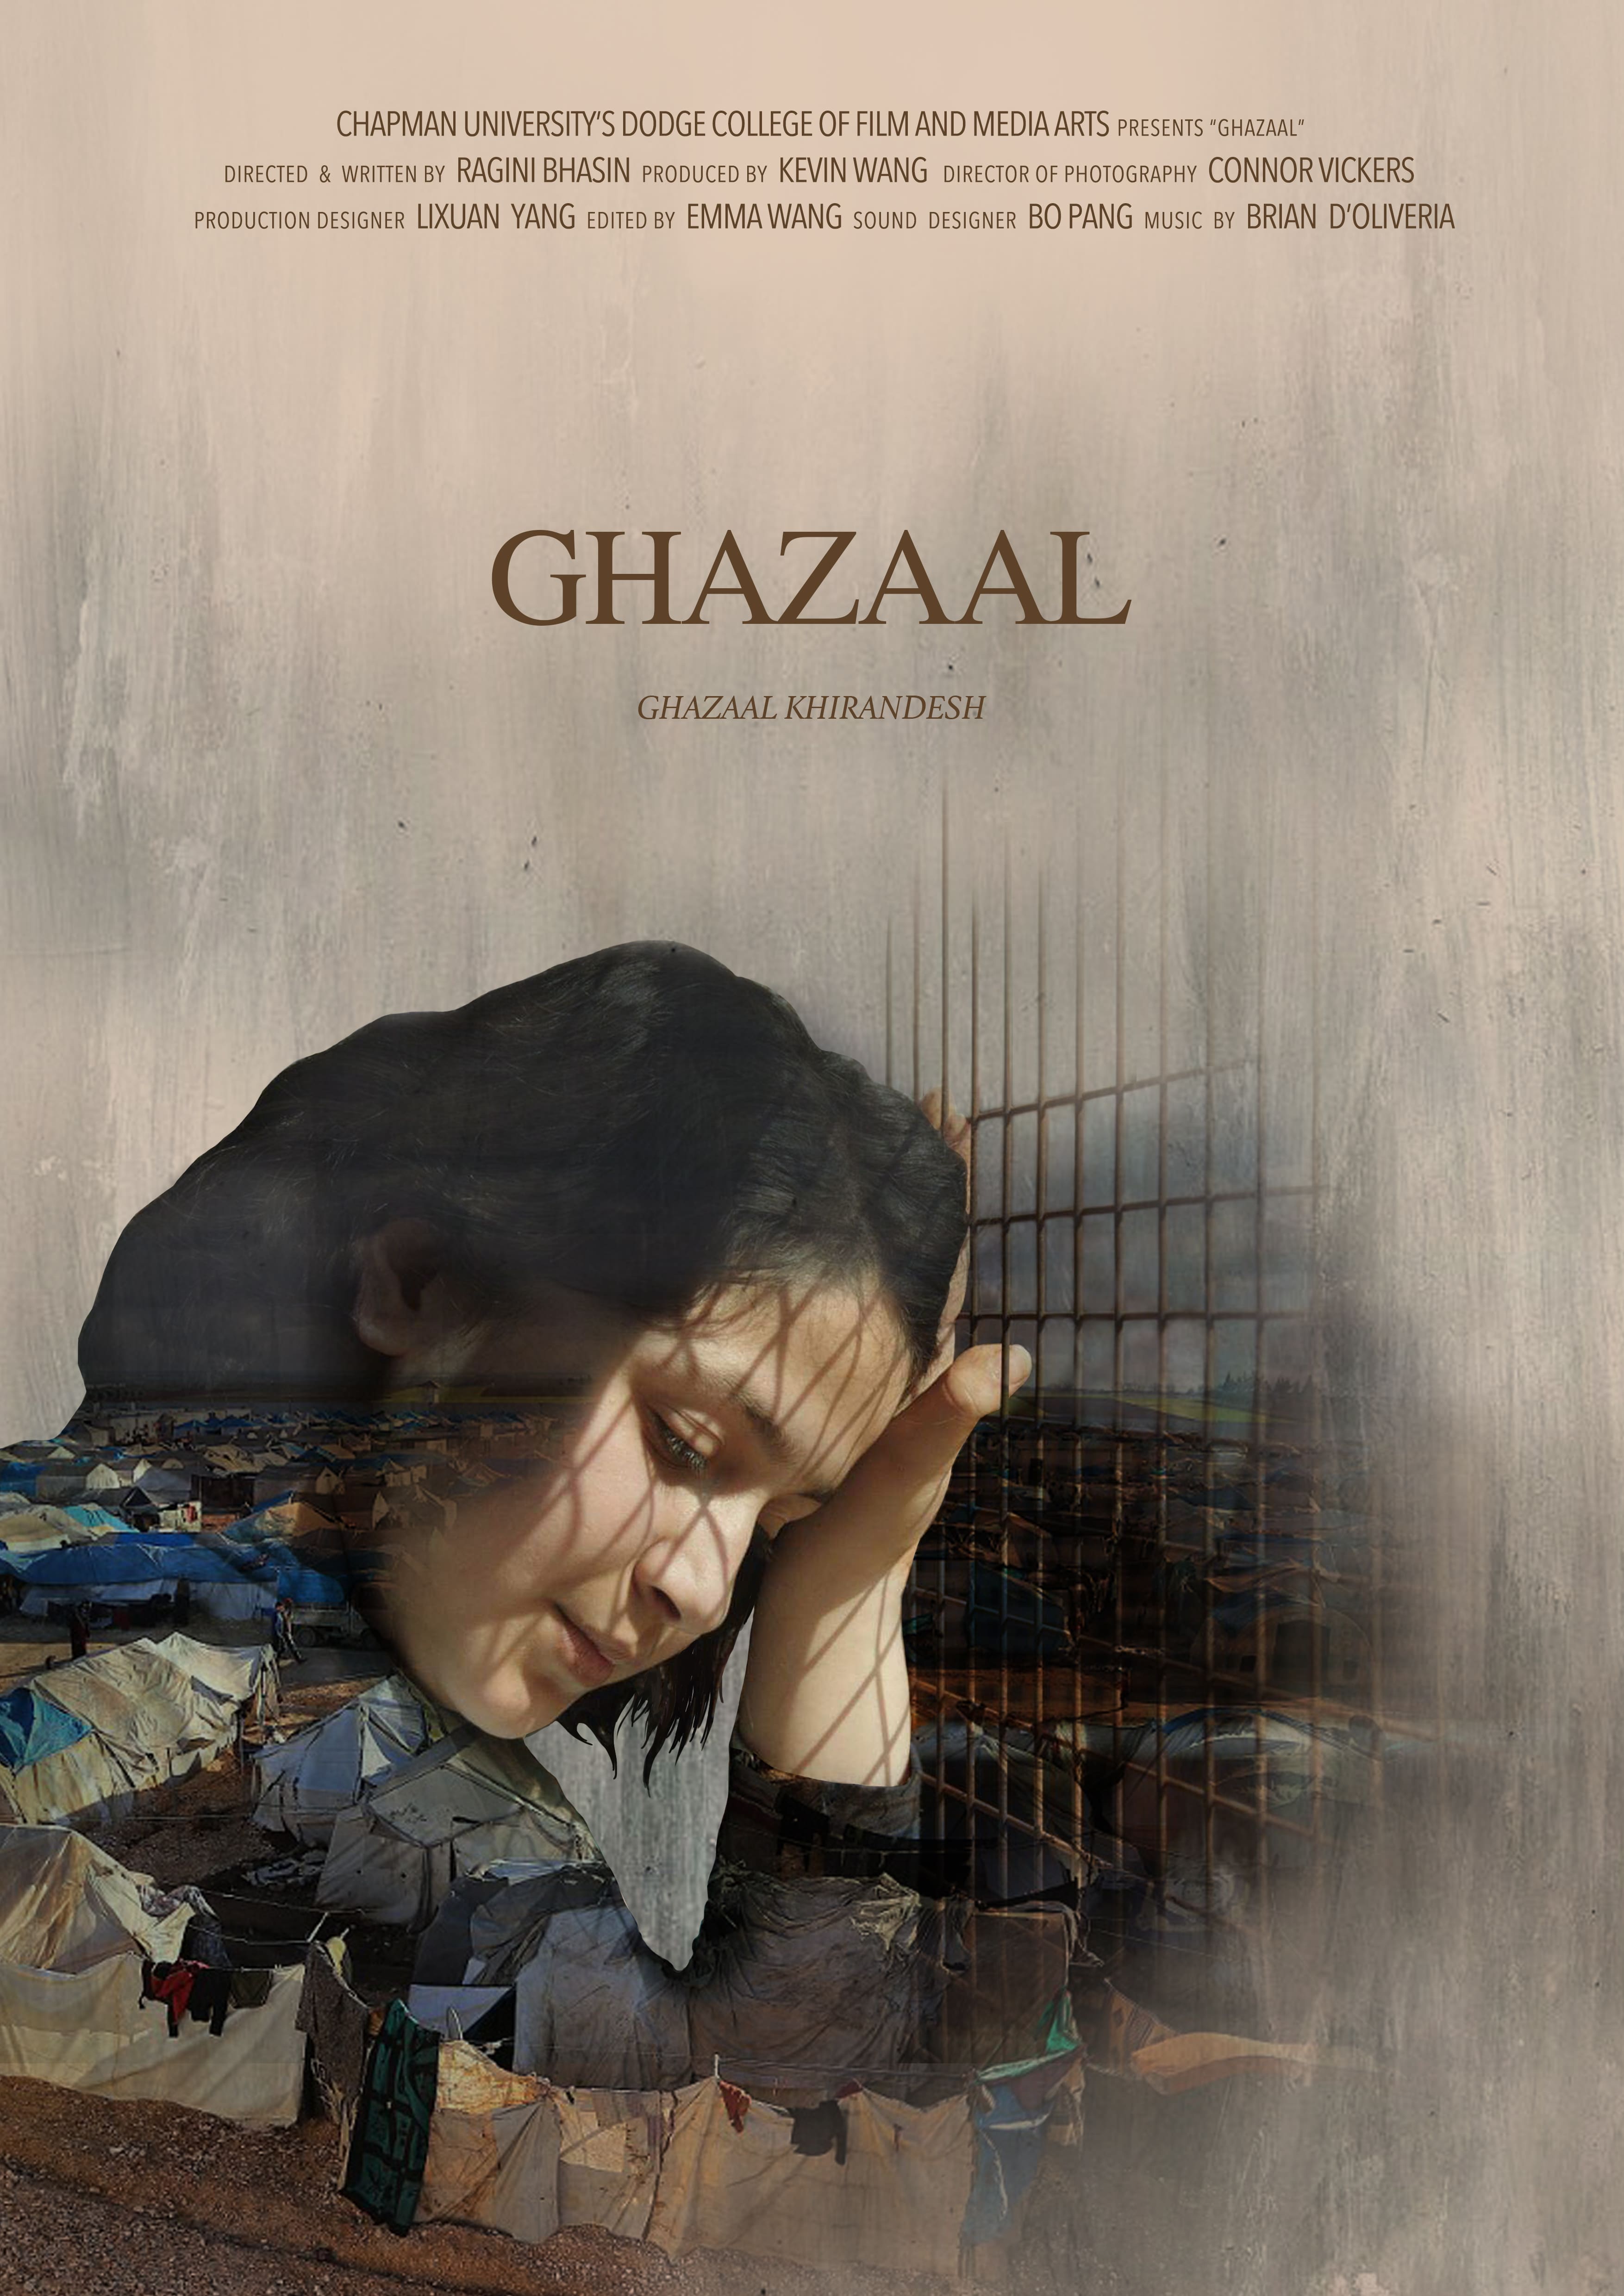 Ghazaal: The making of a short